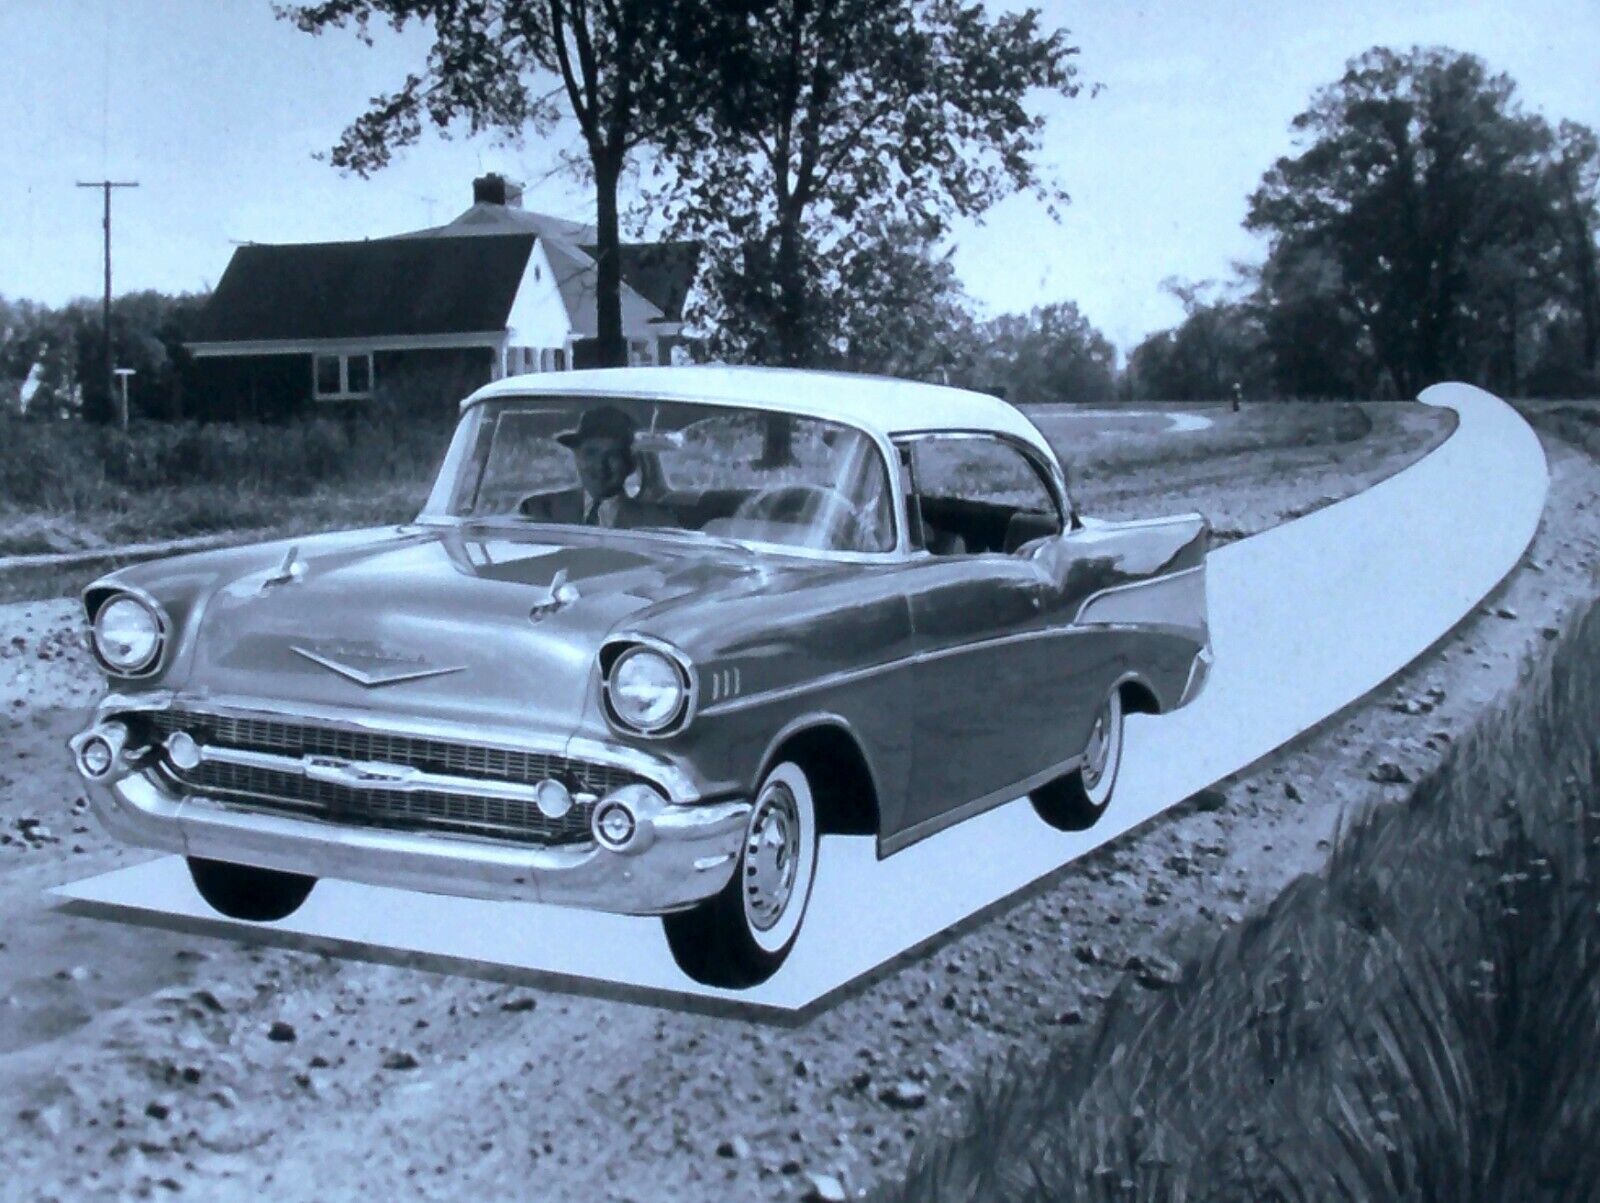 1957 Chevrolet Ride - That Paves The Way - MP4 CD OR DVD